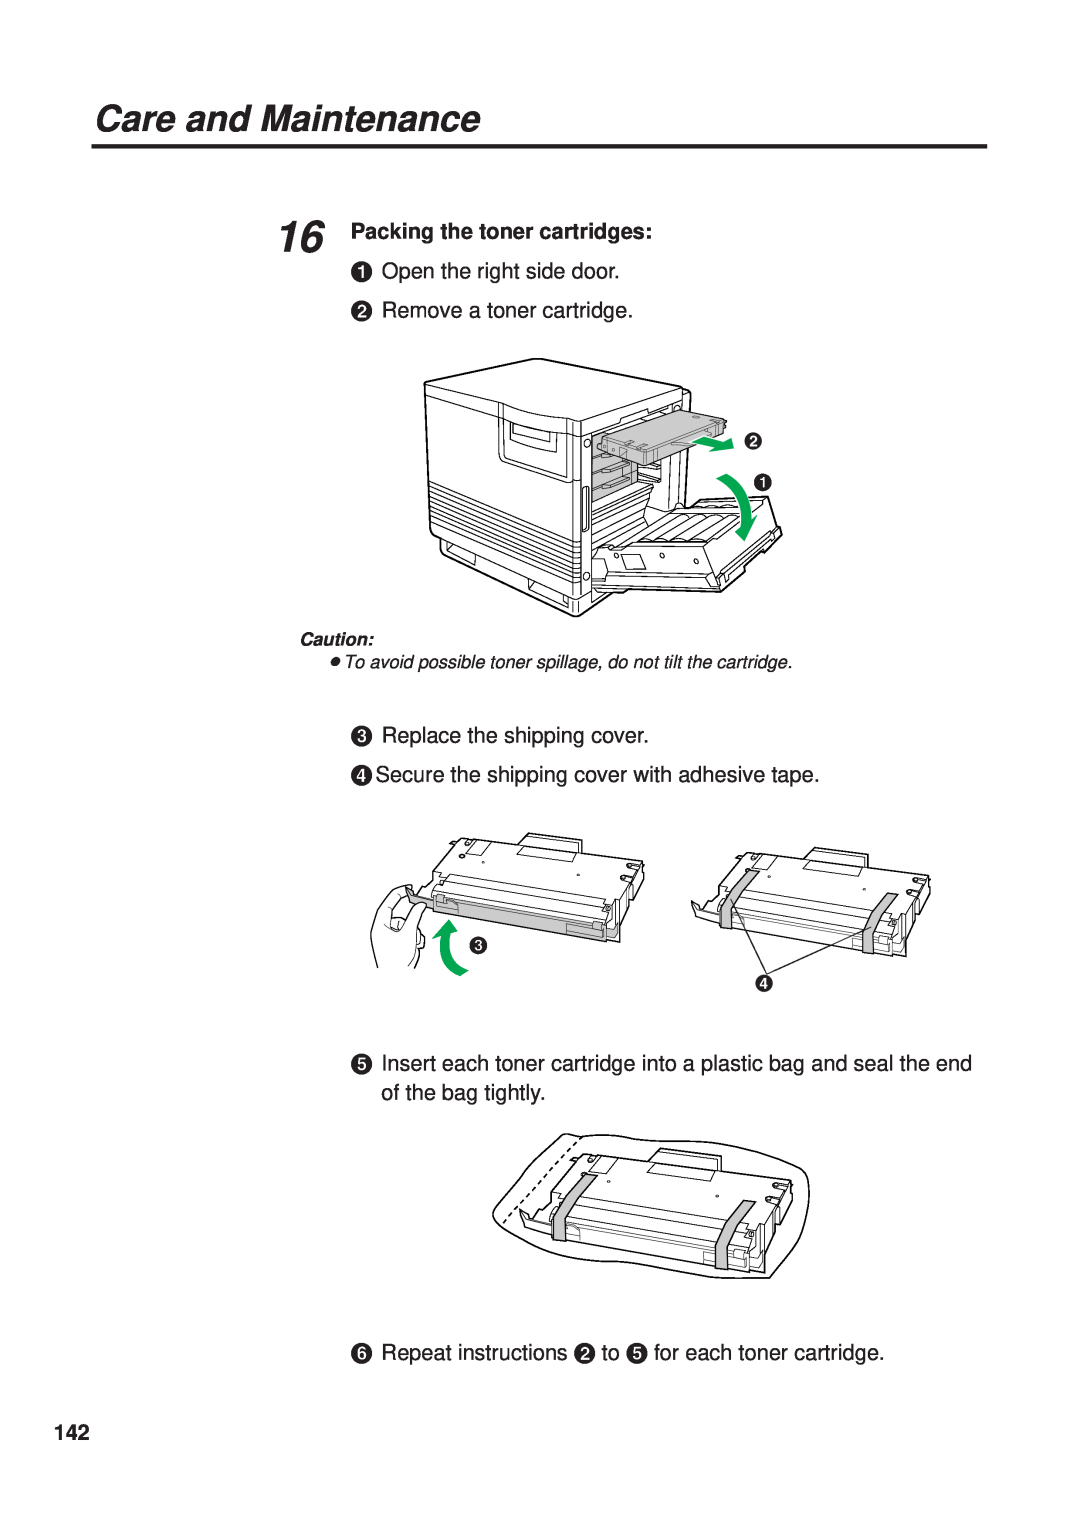 Panasonic KX-PS8000 manual Packing the toner cartridges, # Open the right side door $ Remove a toner cartridge 